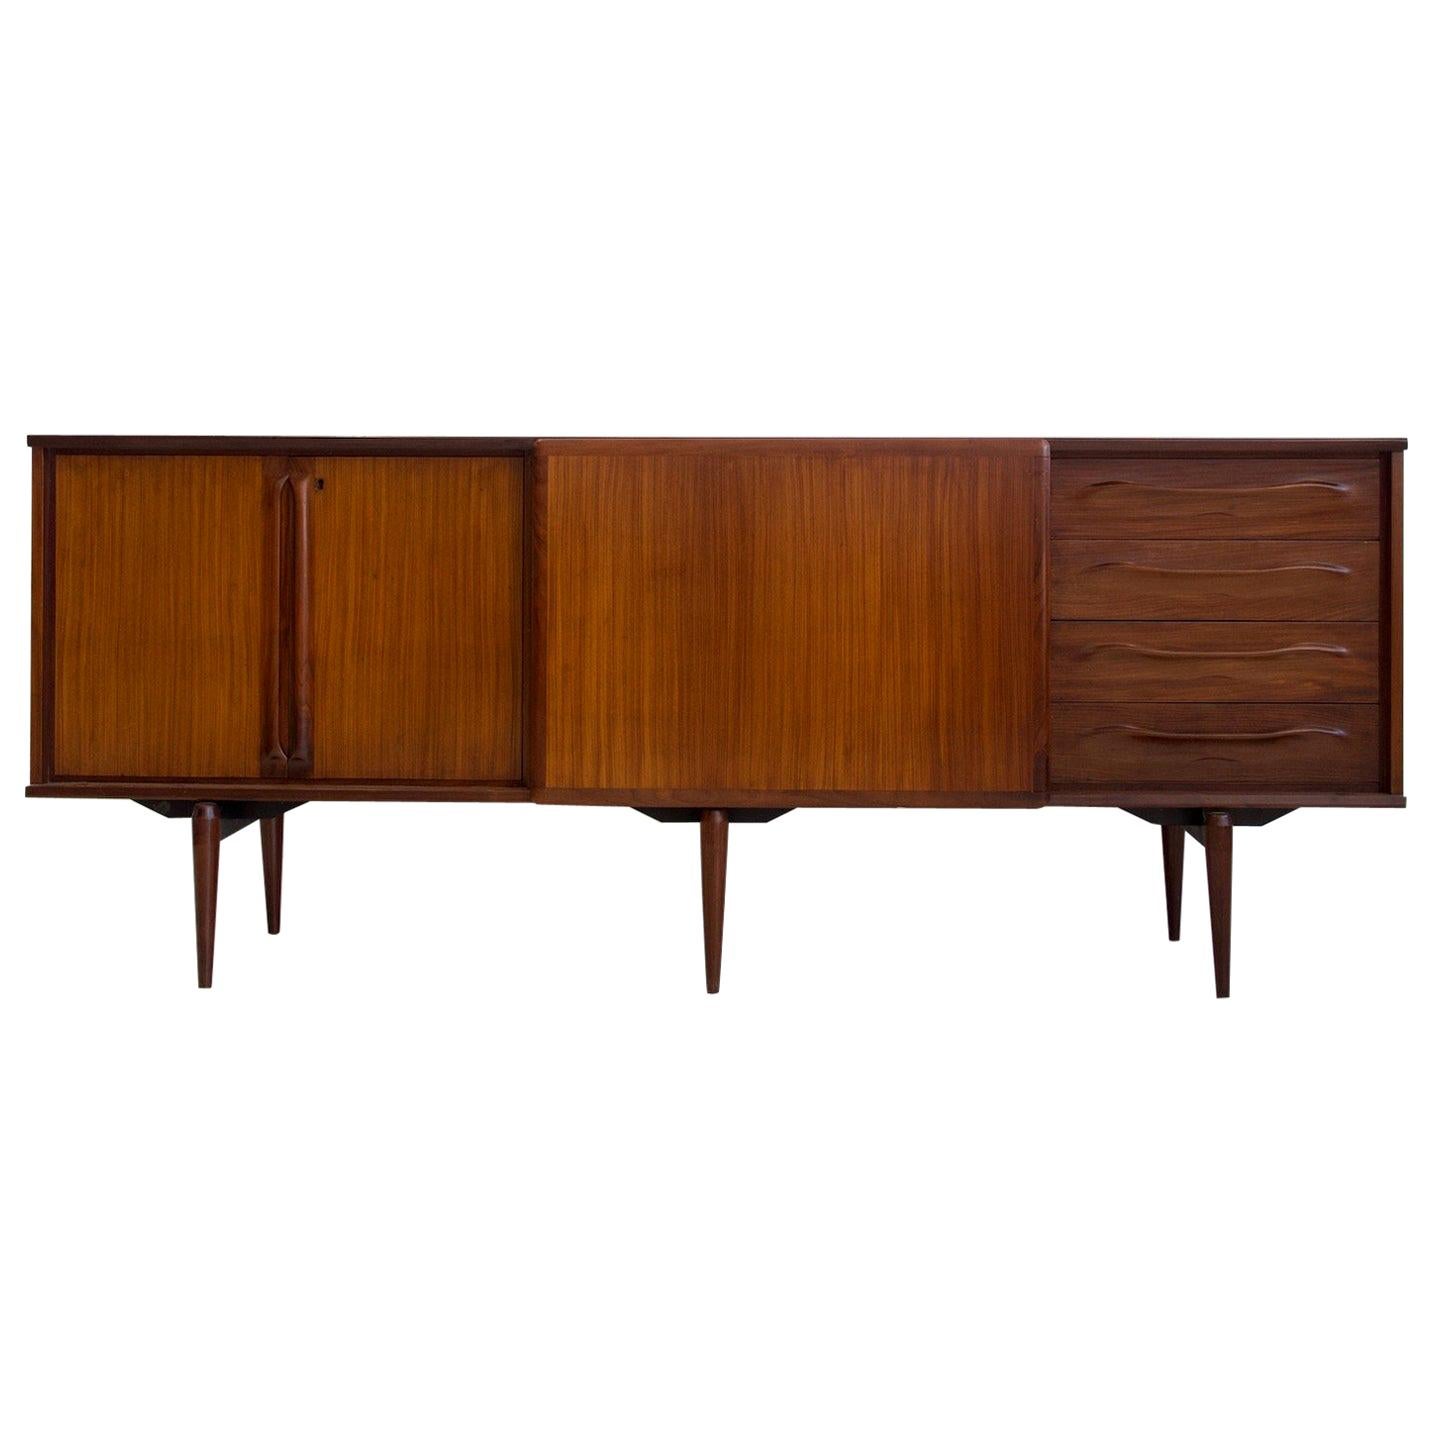 Teak Sideboard with Sliding Doors and Drawers by Amma